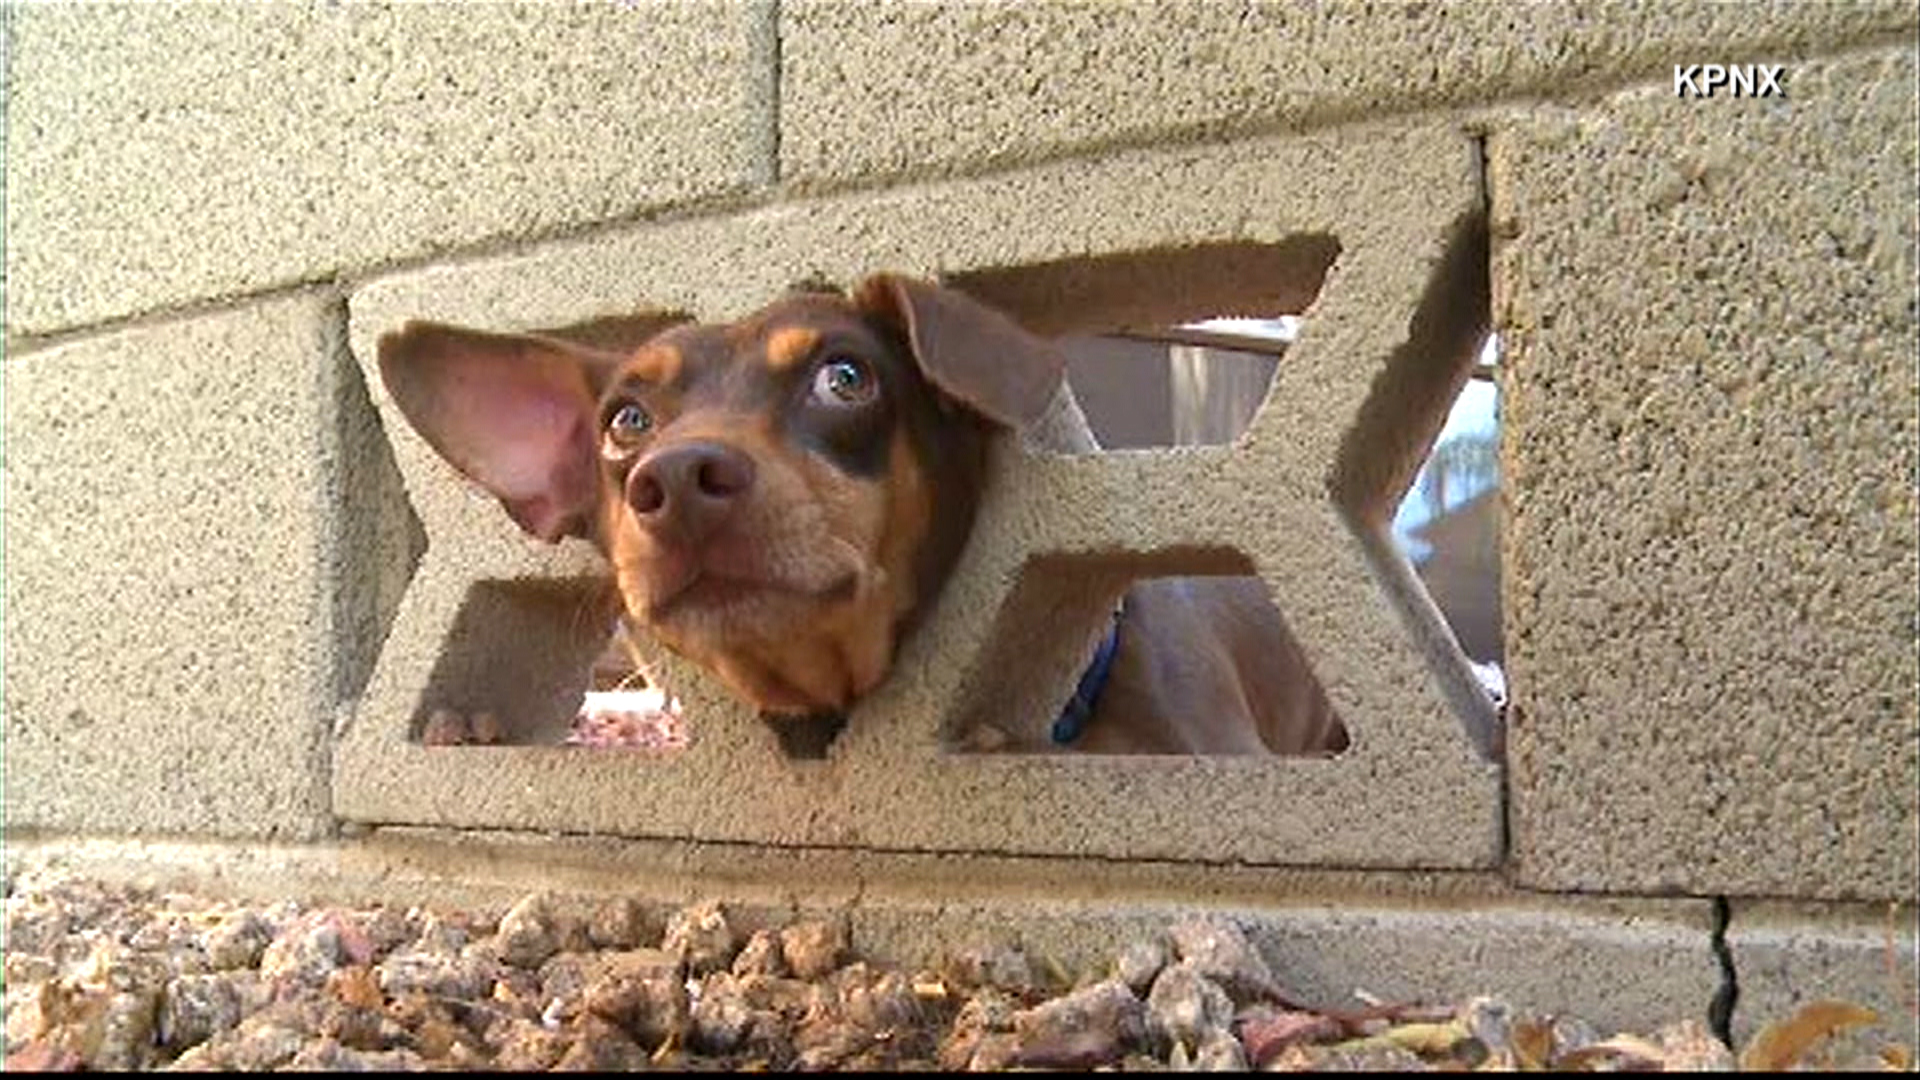 Firefighters Free Dog Stuck in a Wall